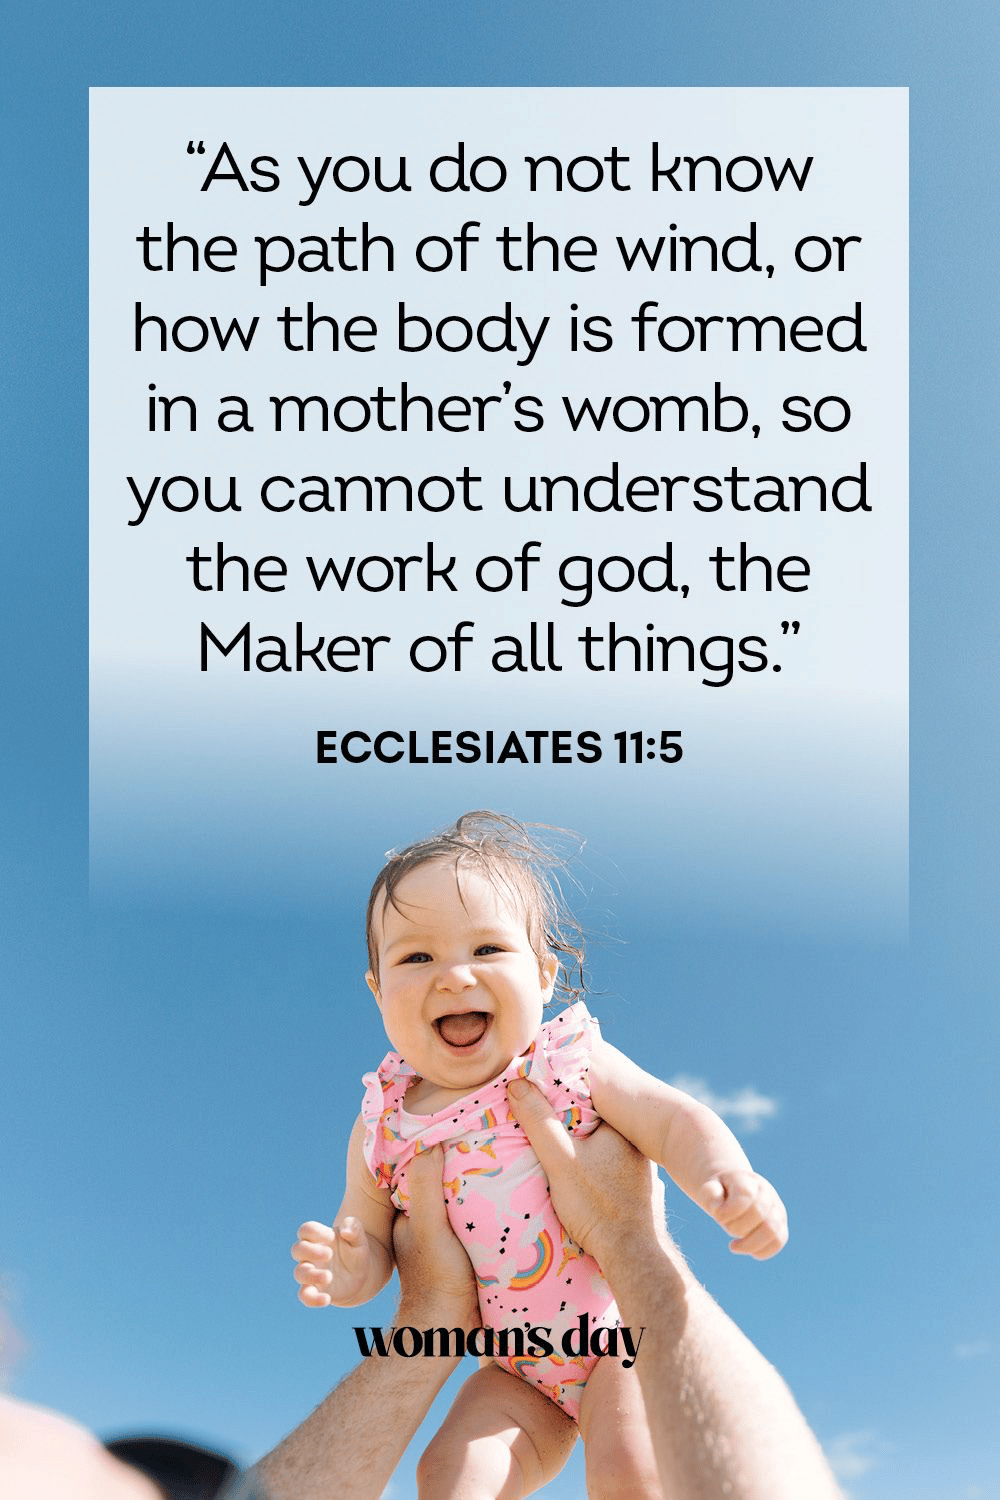 “As you do not know the path of the wind, or how the body is formed in a mother’s womb, so you cannot understand the work of God, the Maker of all things.” - Ecclesiastes 11:5